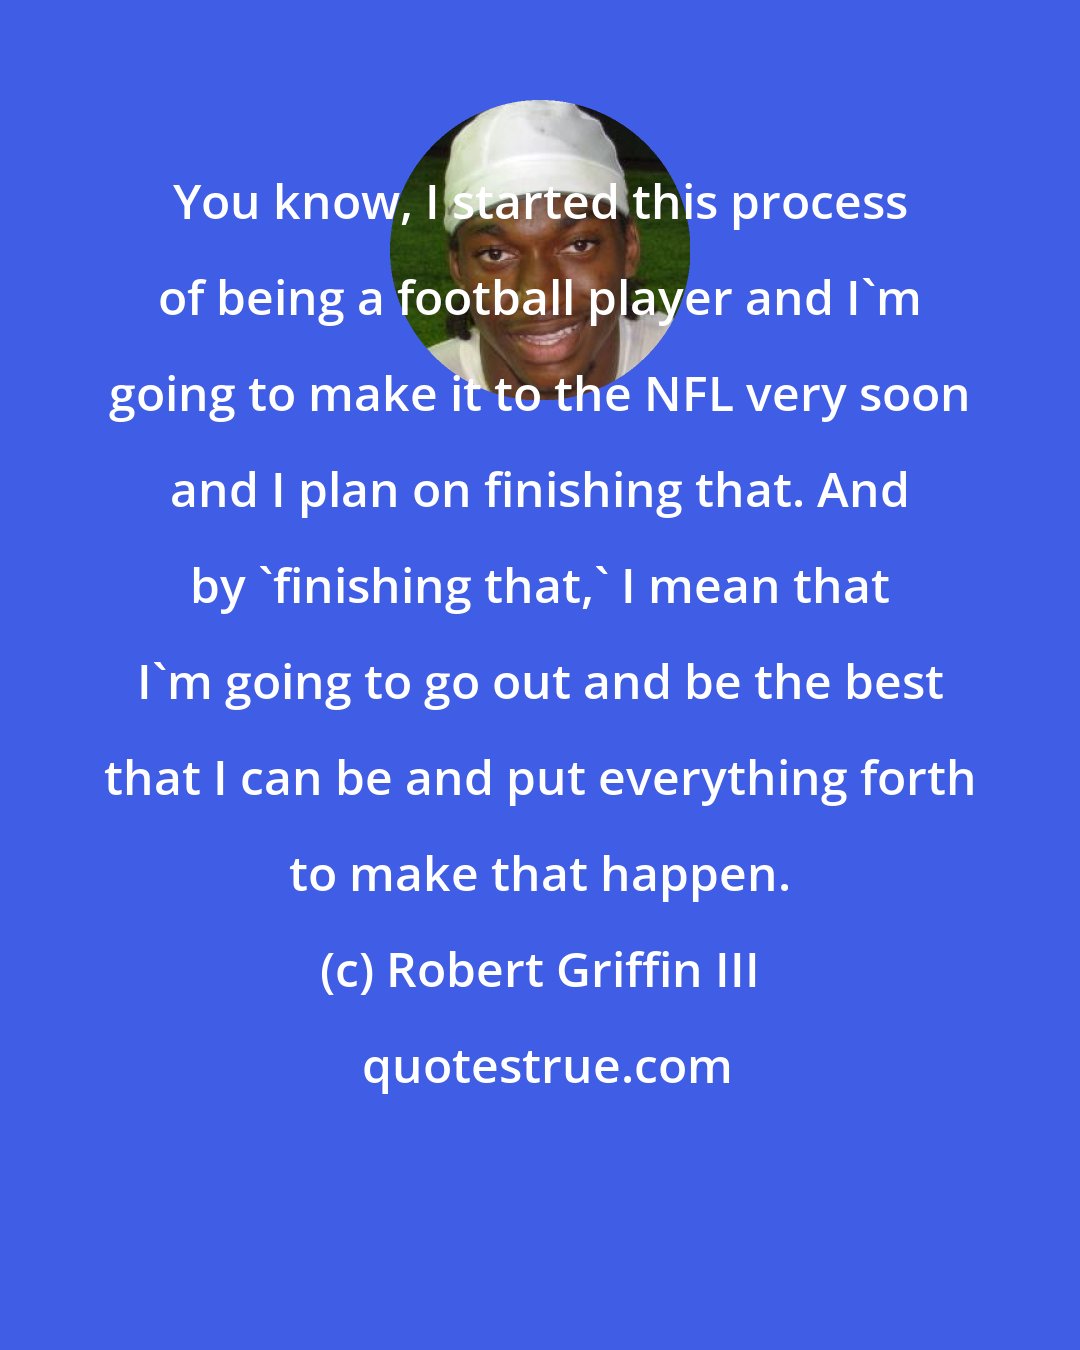 Robert Griffin III: You know, I started this process of being a football player and I'm going to make it to the NFL very soon and I plan on finishing that. And by 'finishing that,' I mean that I'm going to go out and be the best that I can be and put everything forth to make that happen.